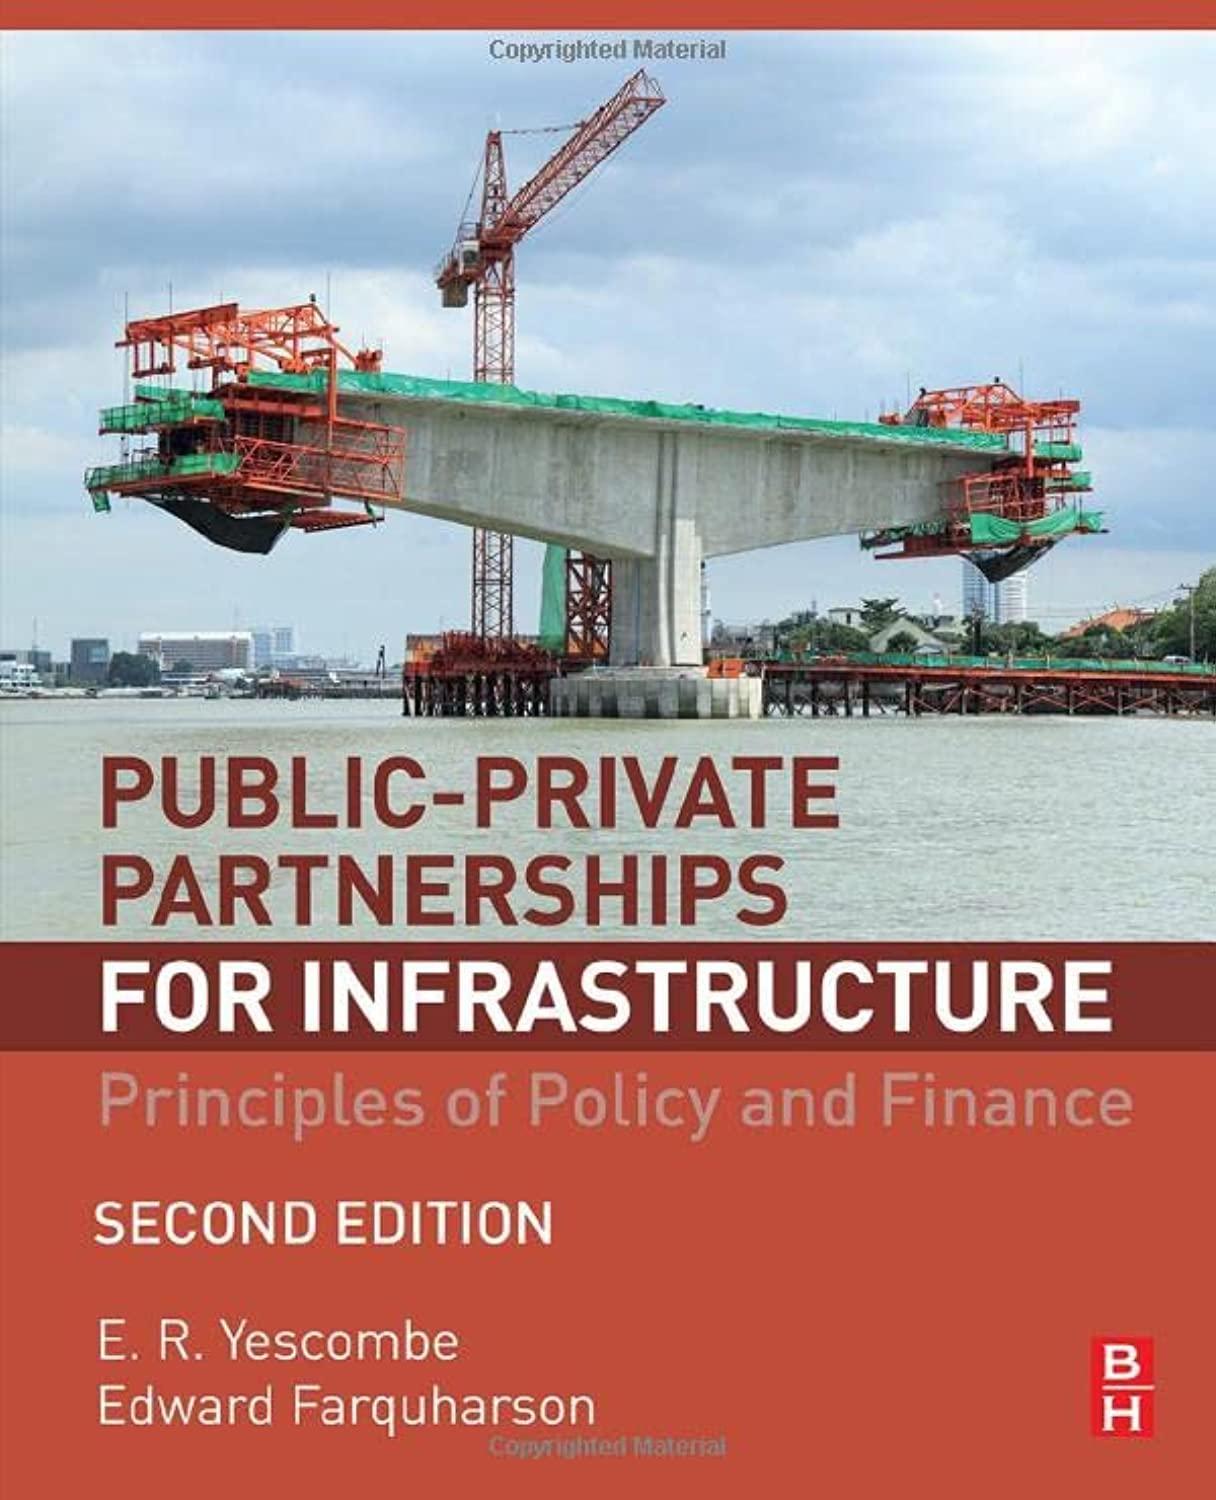 public private partnerships principles of policy and finance 2nd edition e. r. yescombe, edward farquharson